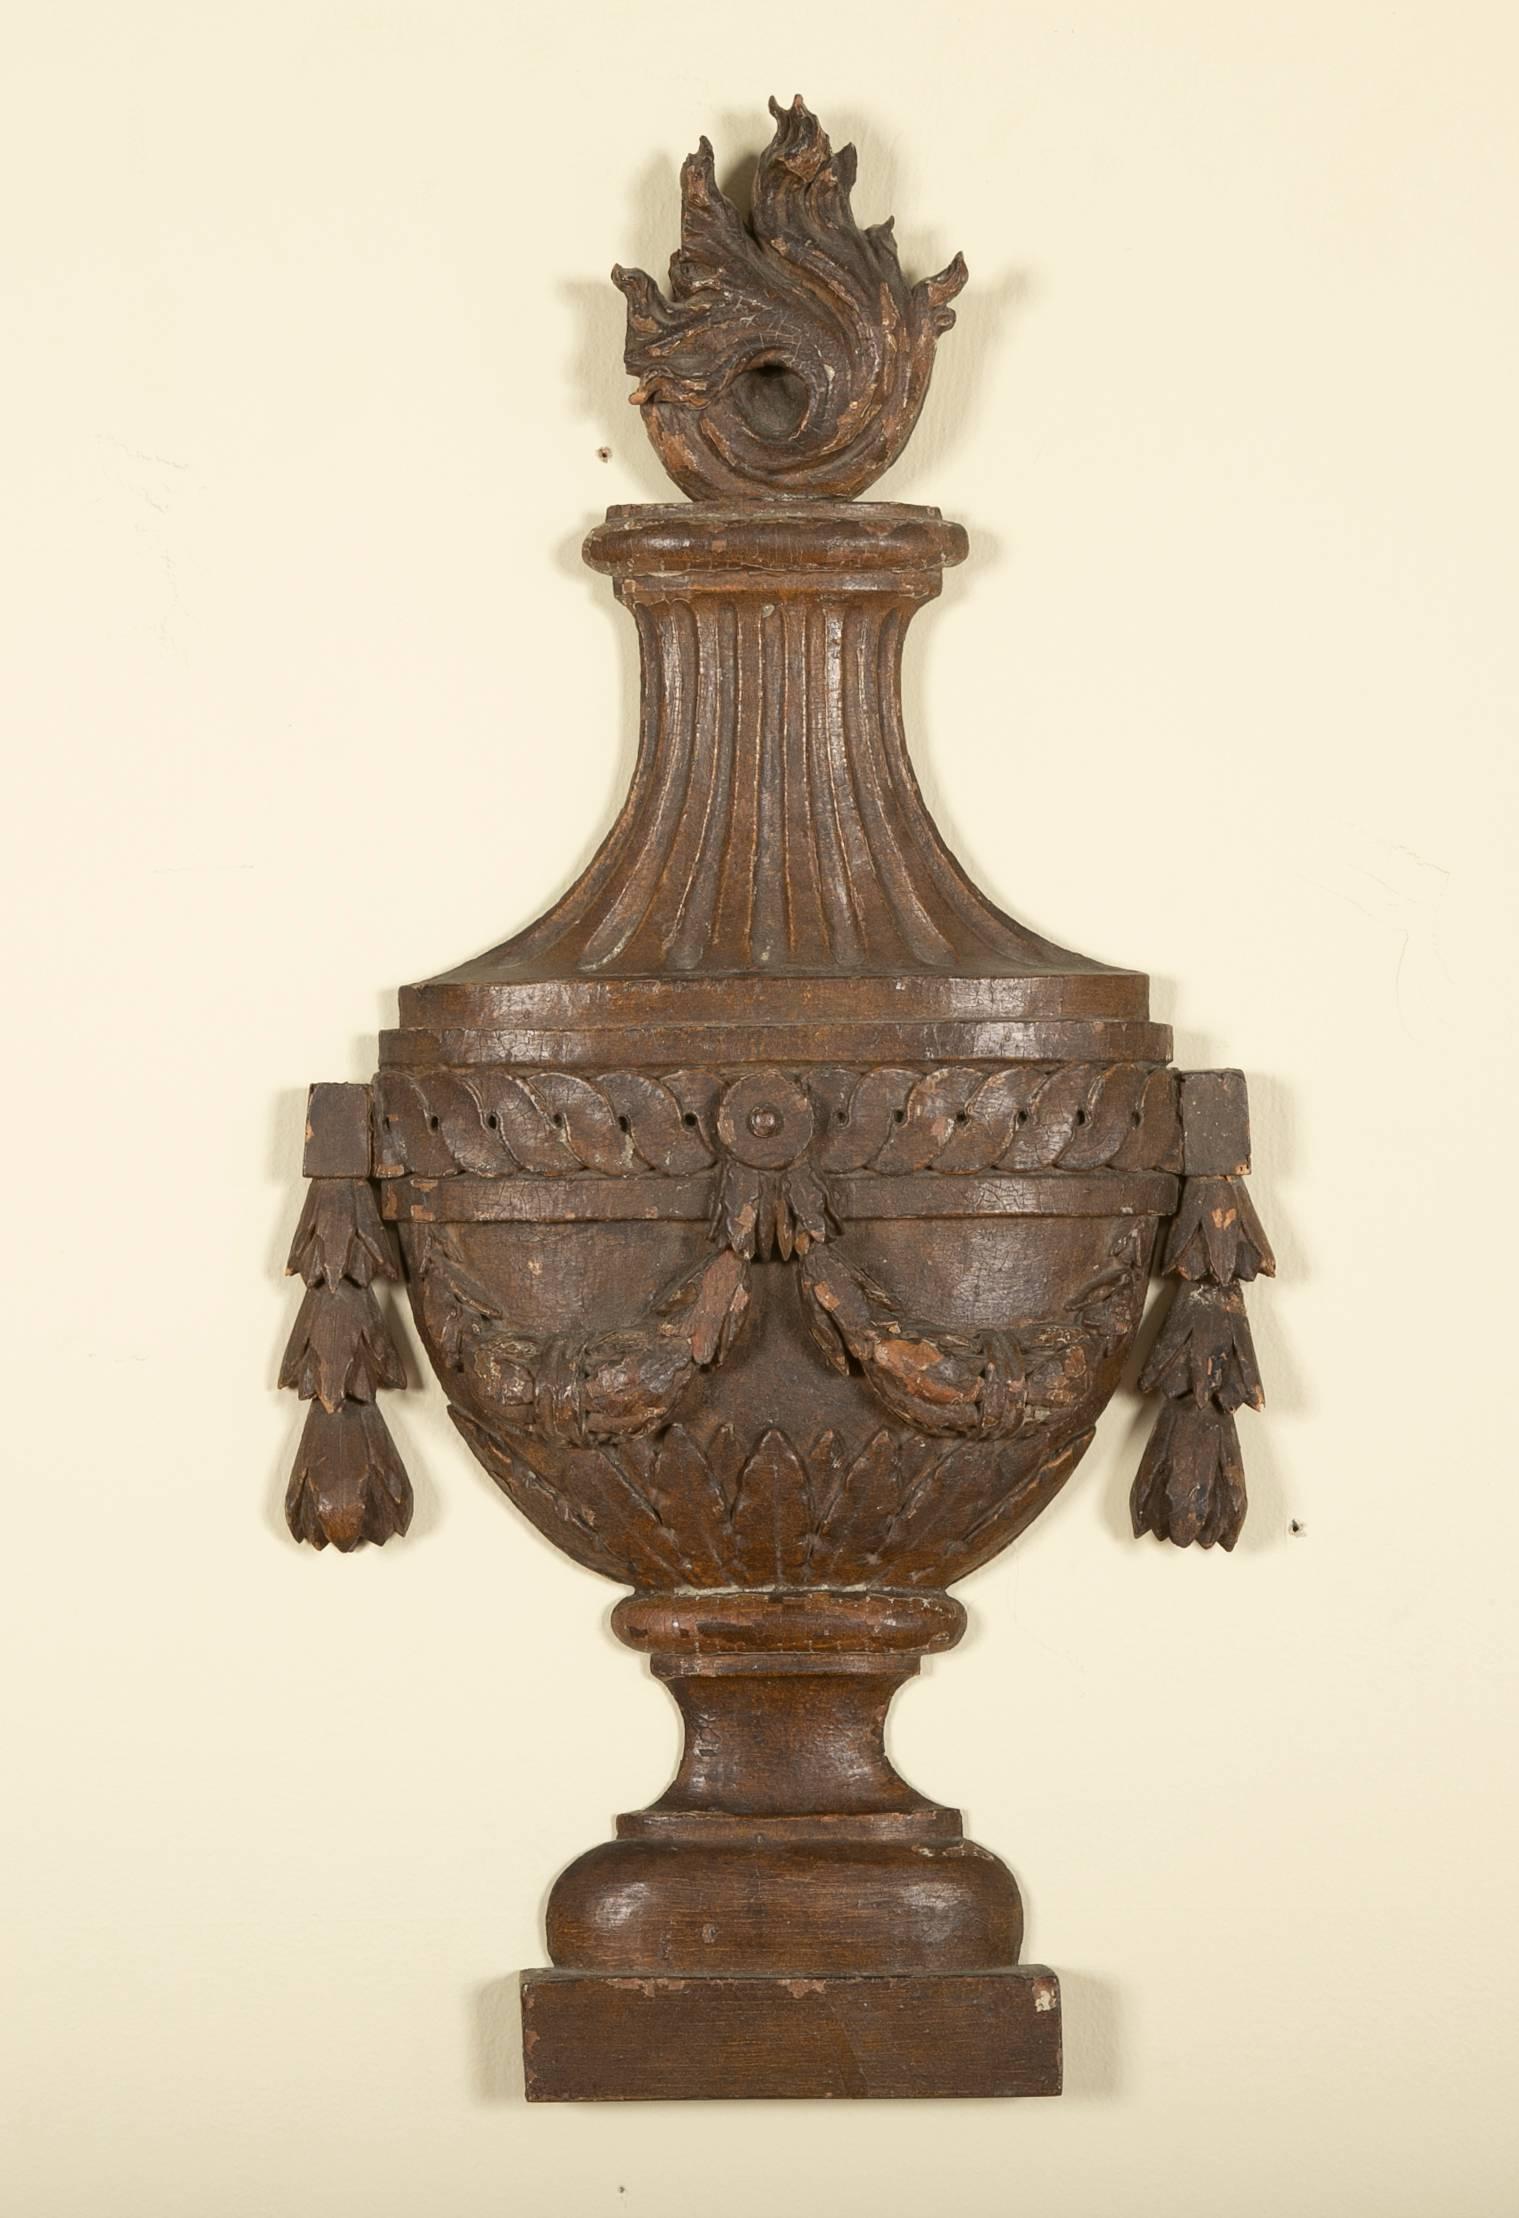 Pair of late 18th century French carved and painted oak wall appliques in the form of urns. Each urn carved with swags and florets, with asymmetrical flames spouting from the tops.
 
Good scale at almost 2 feet high. (23.5 H bt 12 wide by 2.5 deep